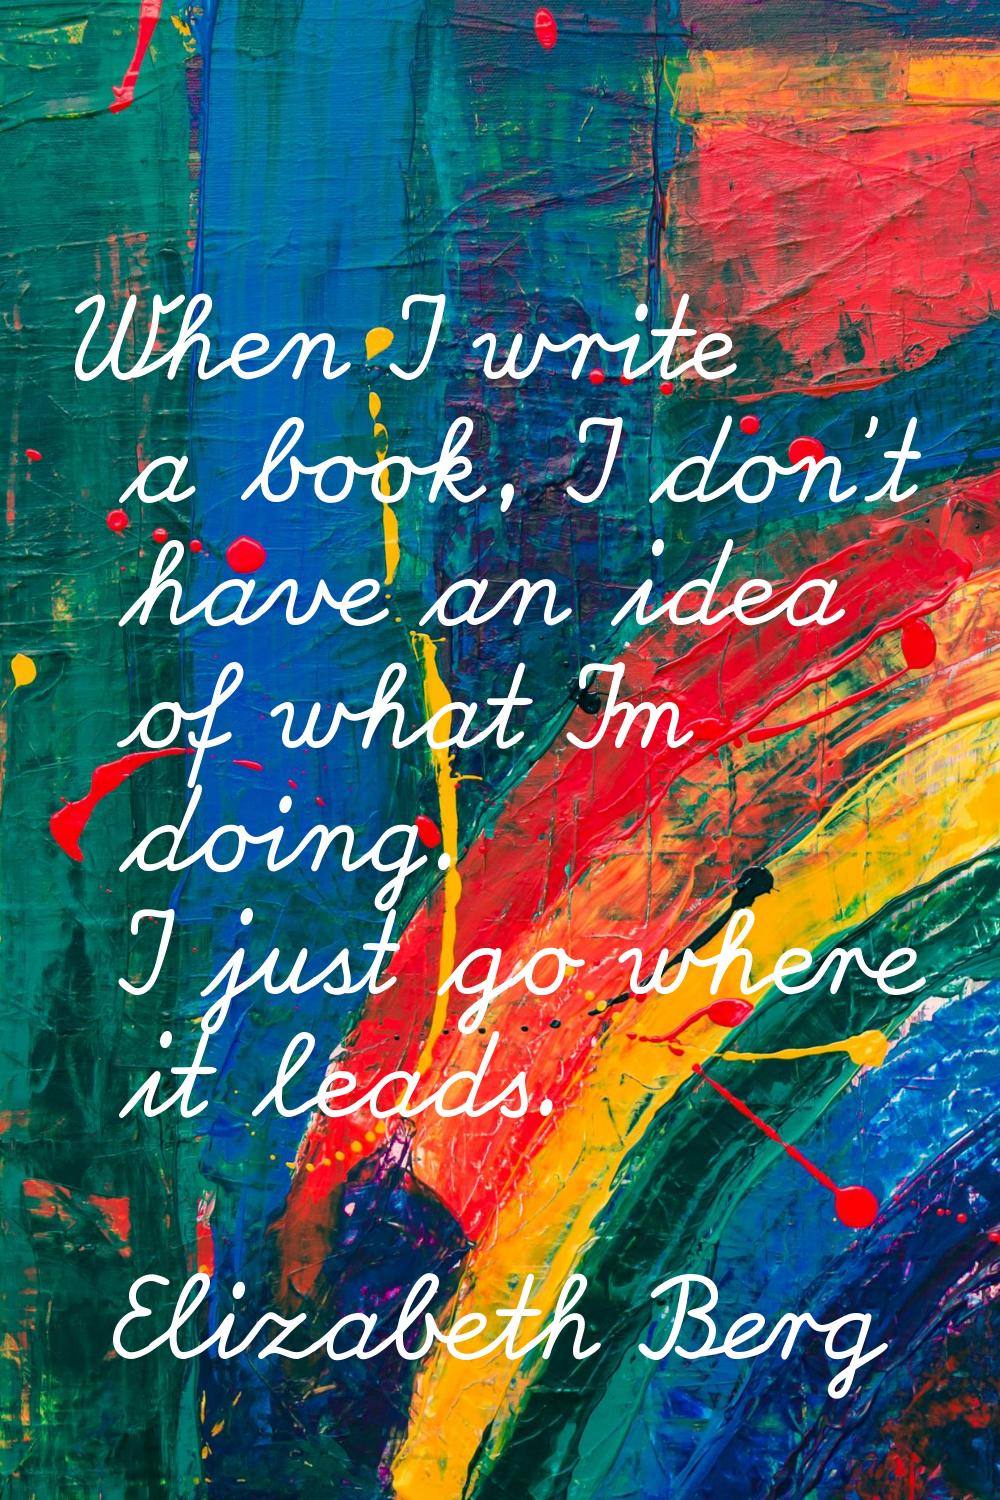 When I write a book, I don't have an idea of what I'm doing. I just go where it leads.